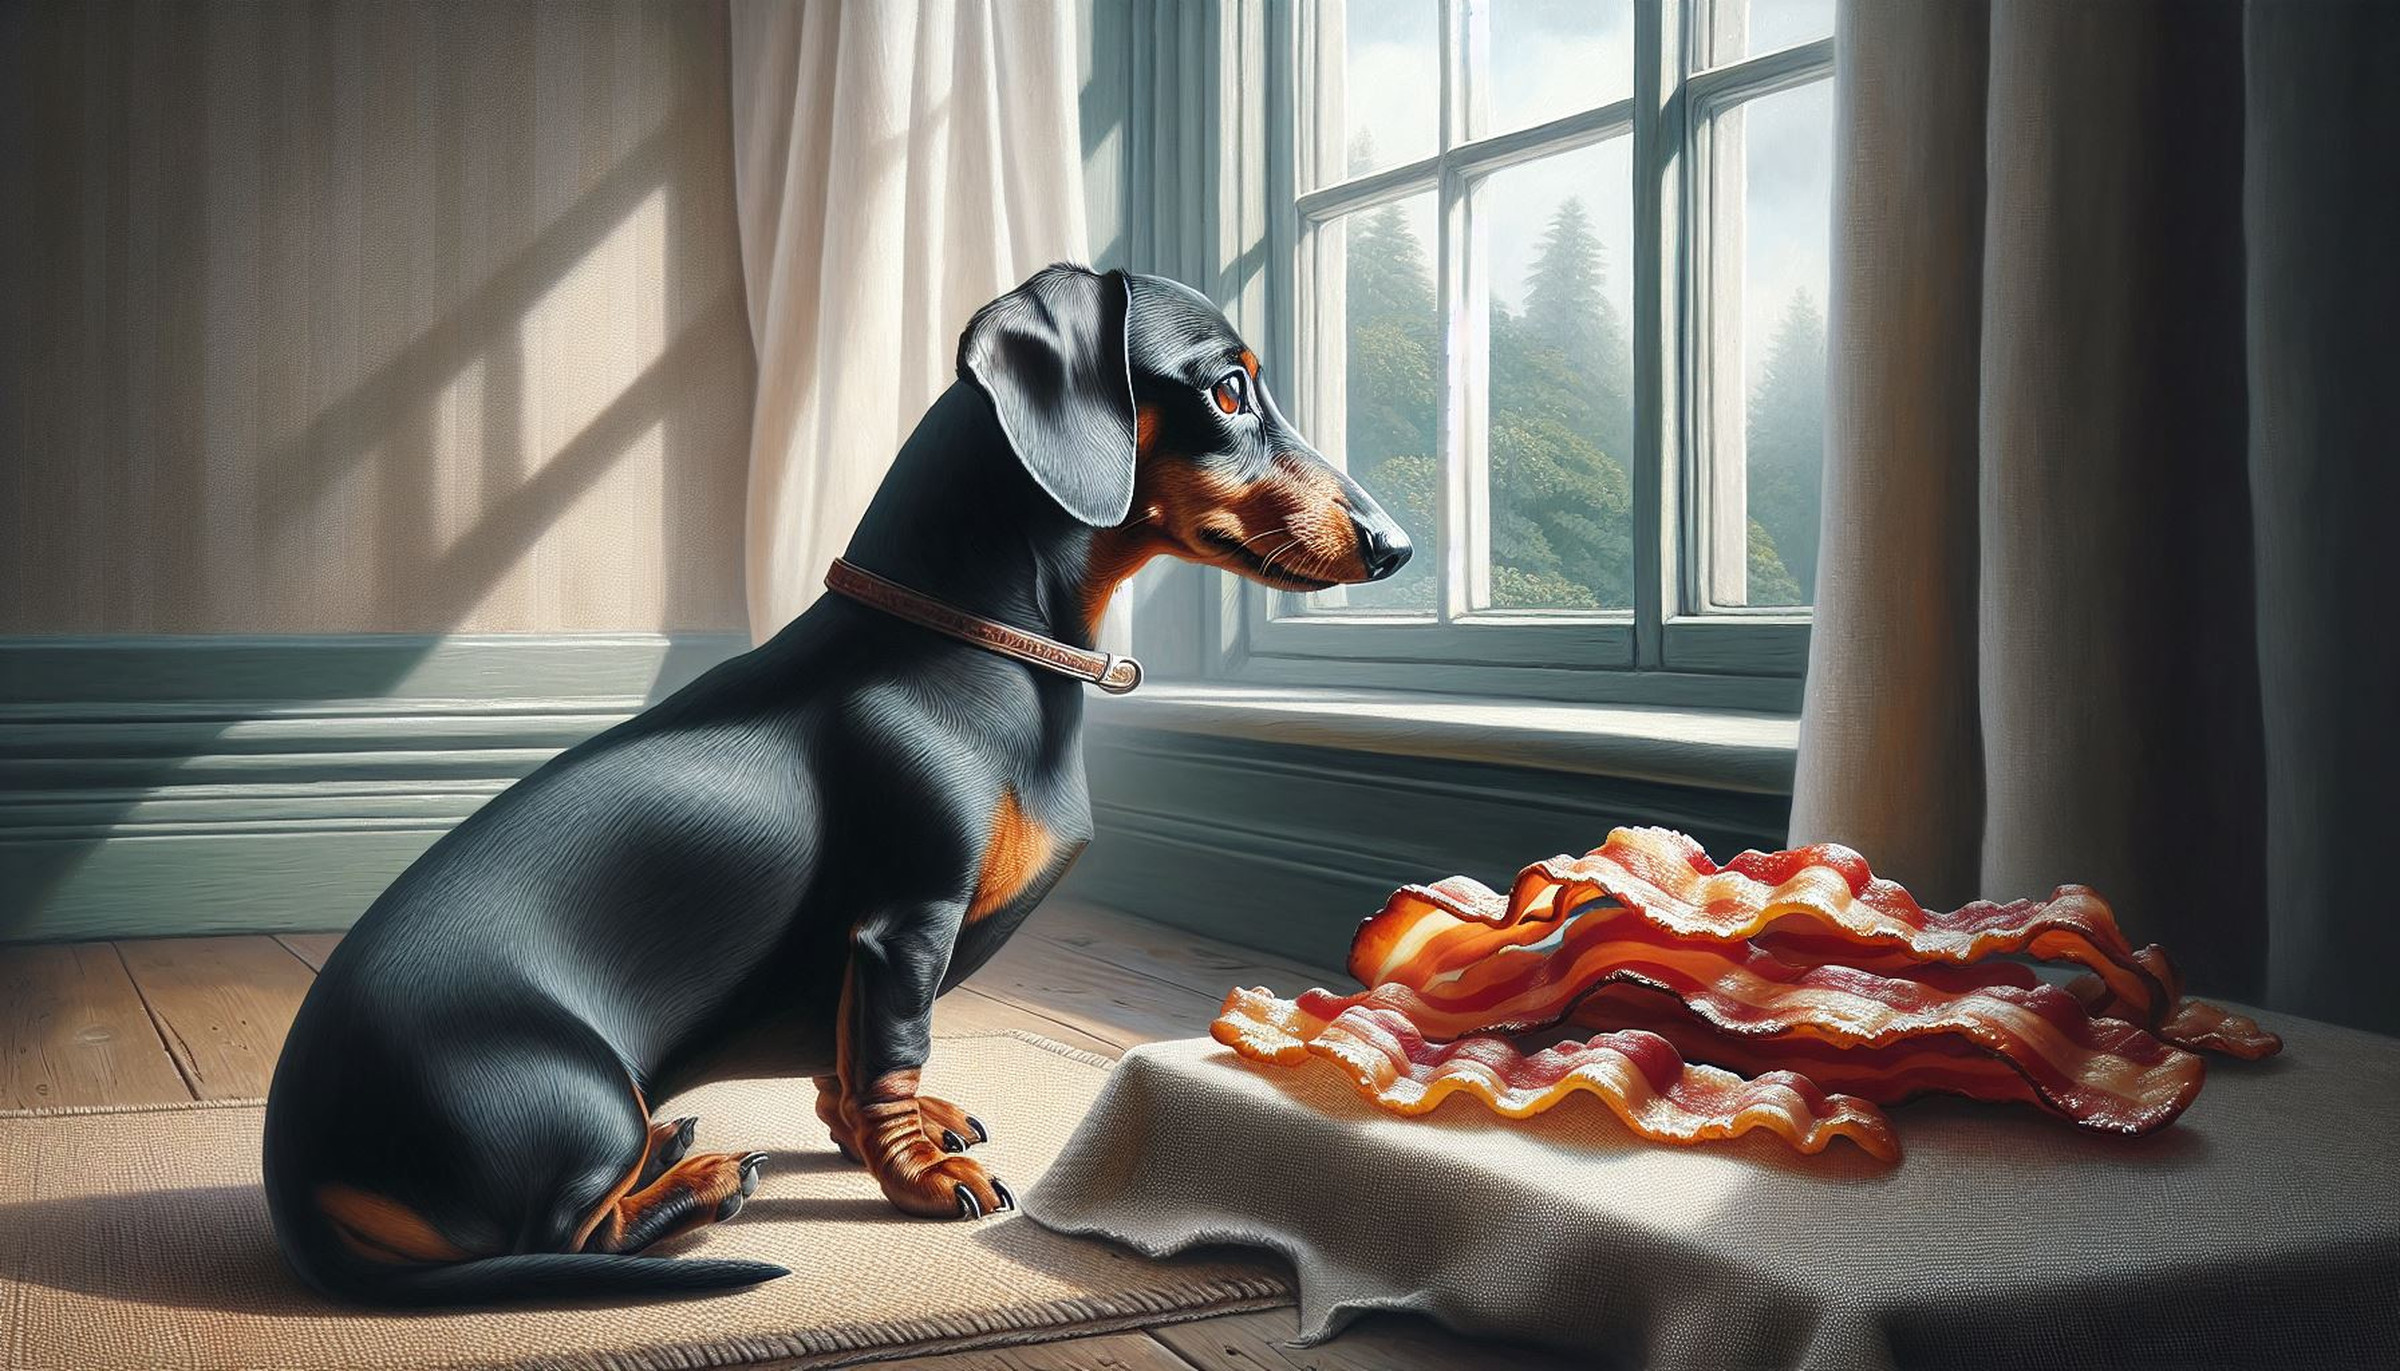 “A hyper-real painting of a dachshund sitting by a window staring at a slice of bacon, natural lighting, medium shot, shallow depth of field.”